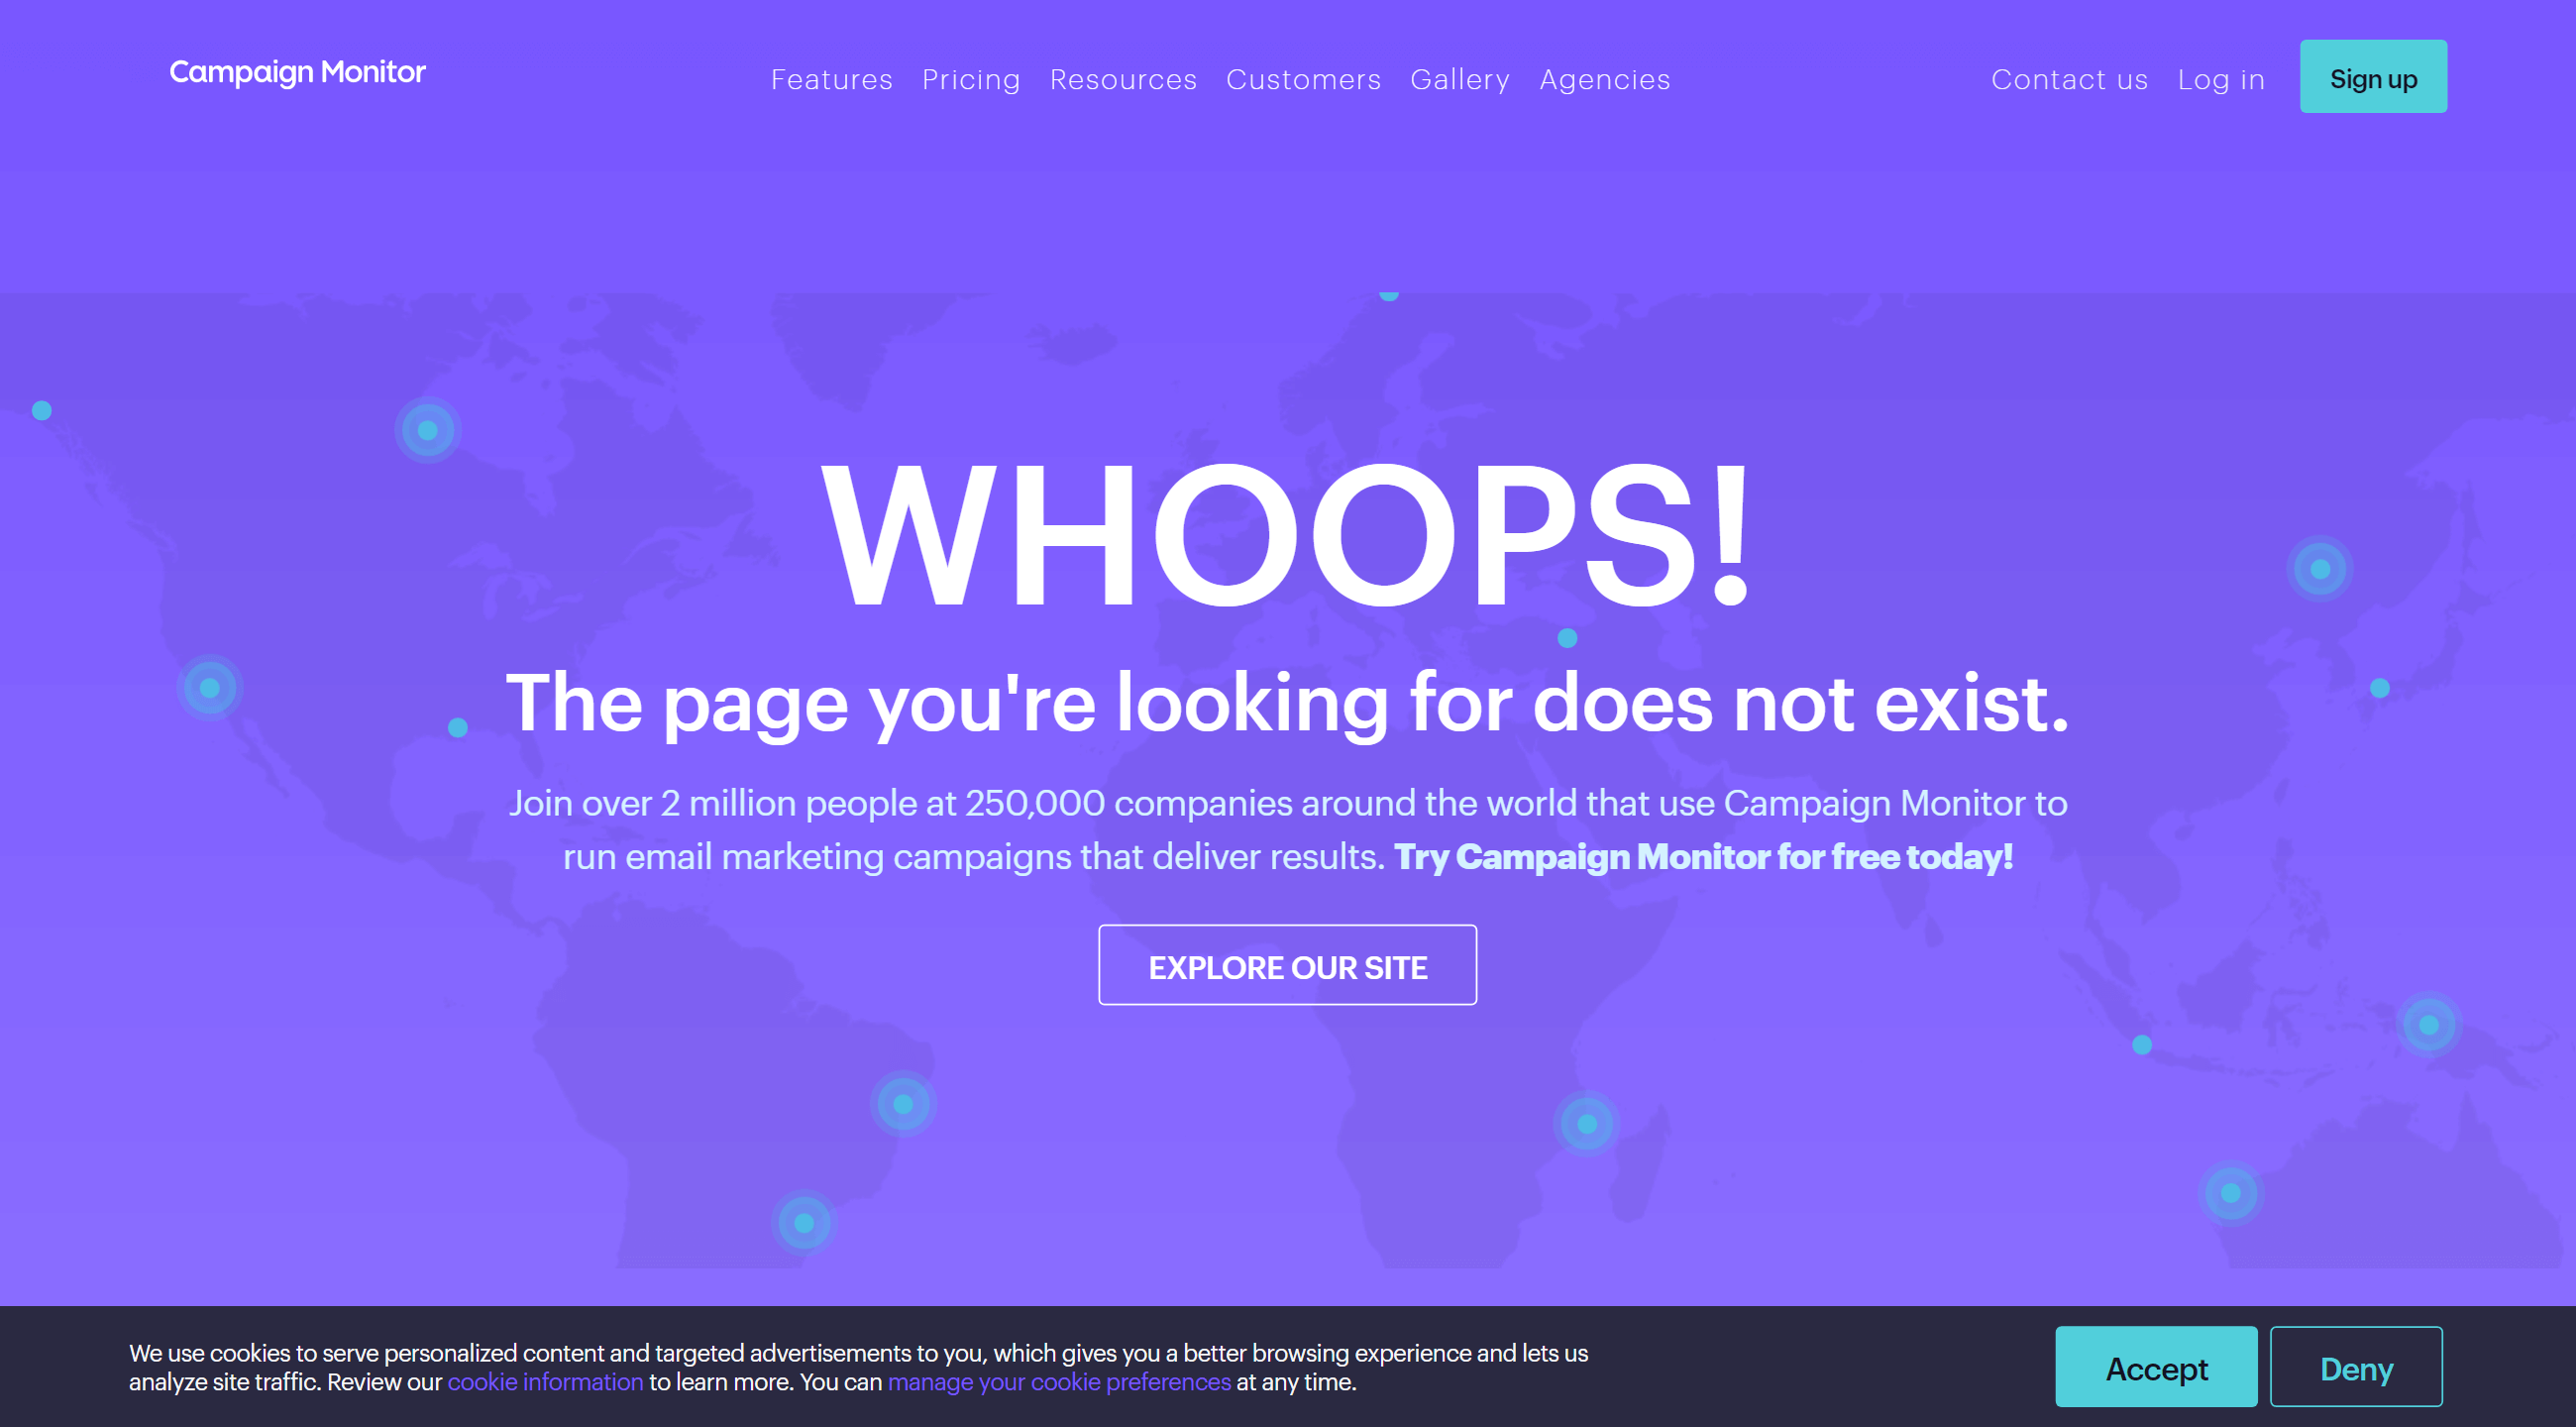 The searched website shows a notice that the page you are looking for does not exist.